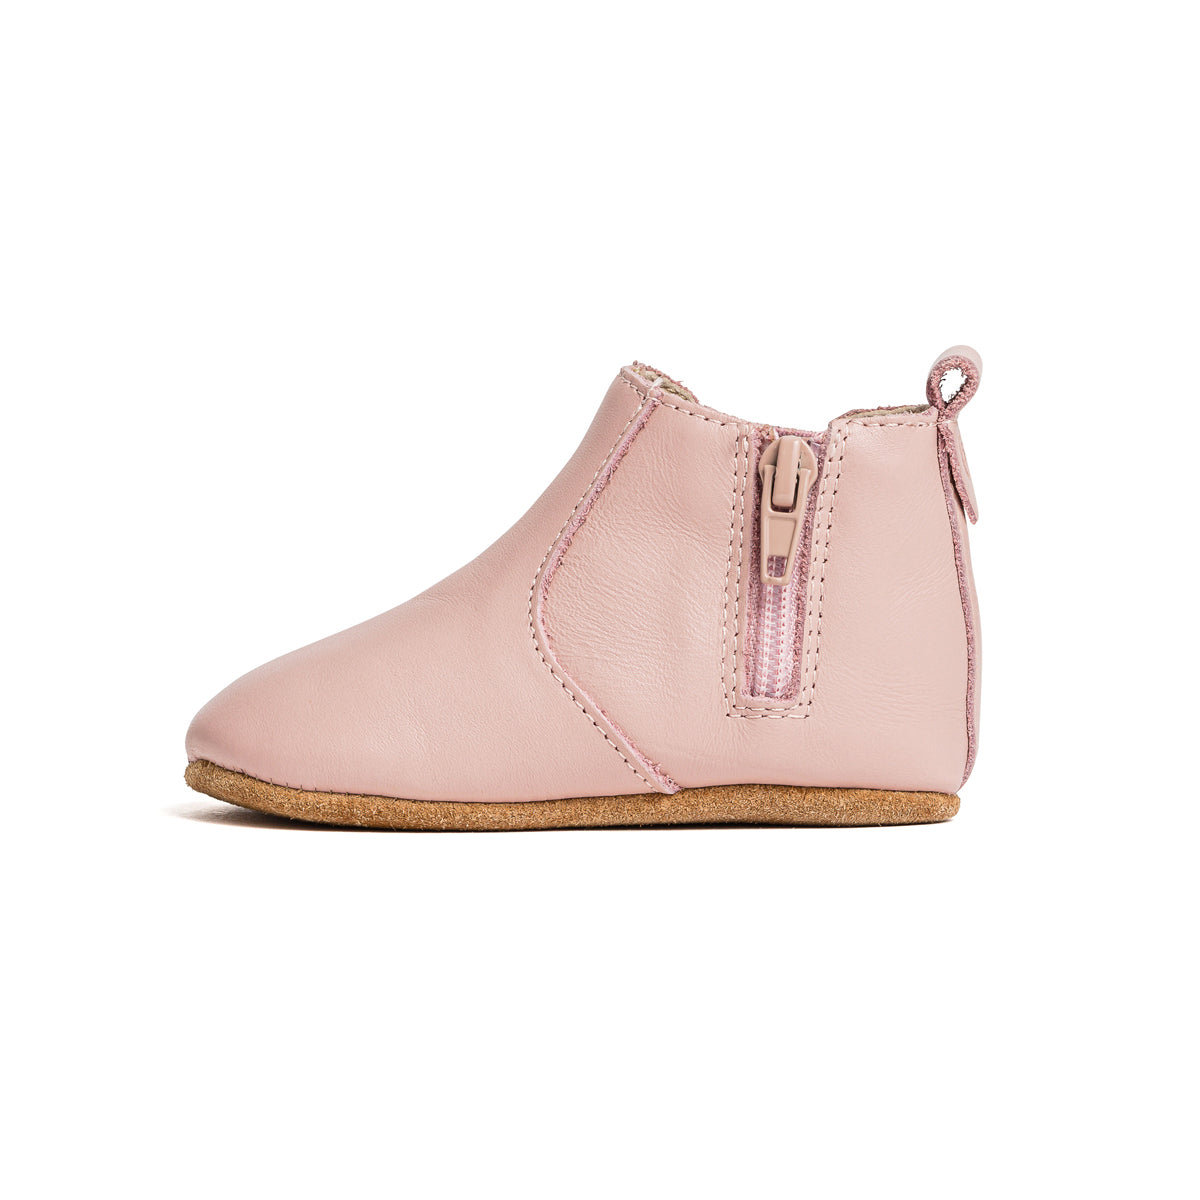 Side view of baby boot in colour blush with lightning detail and zip